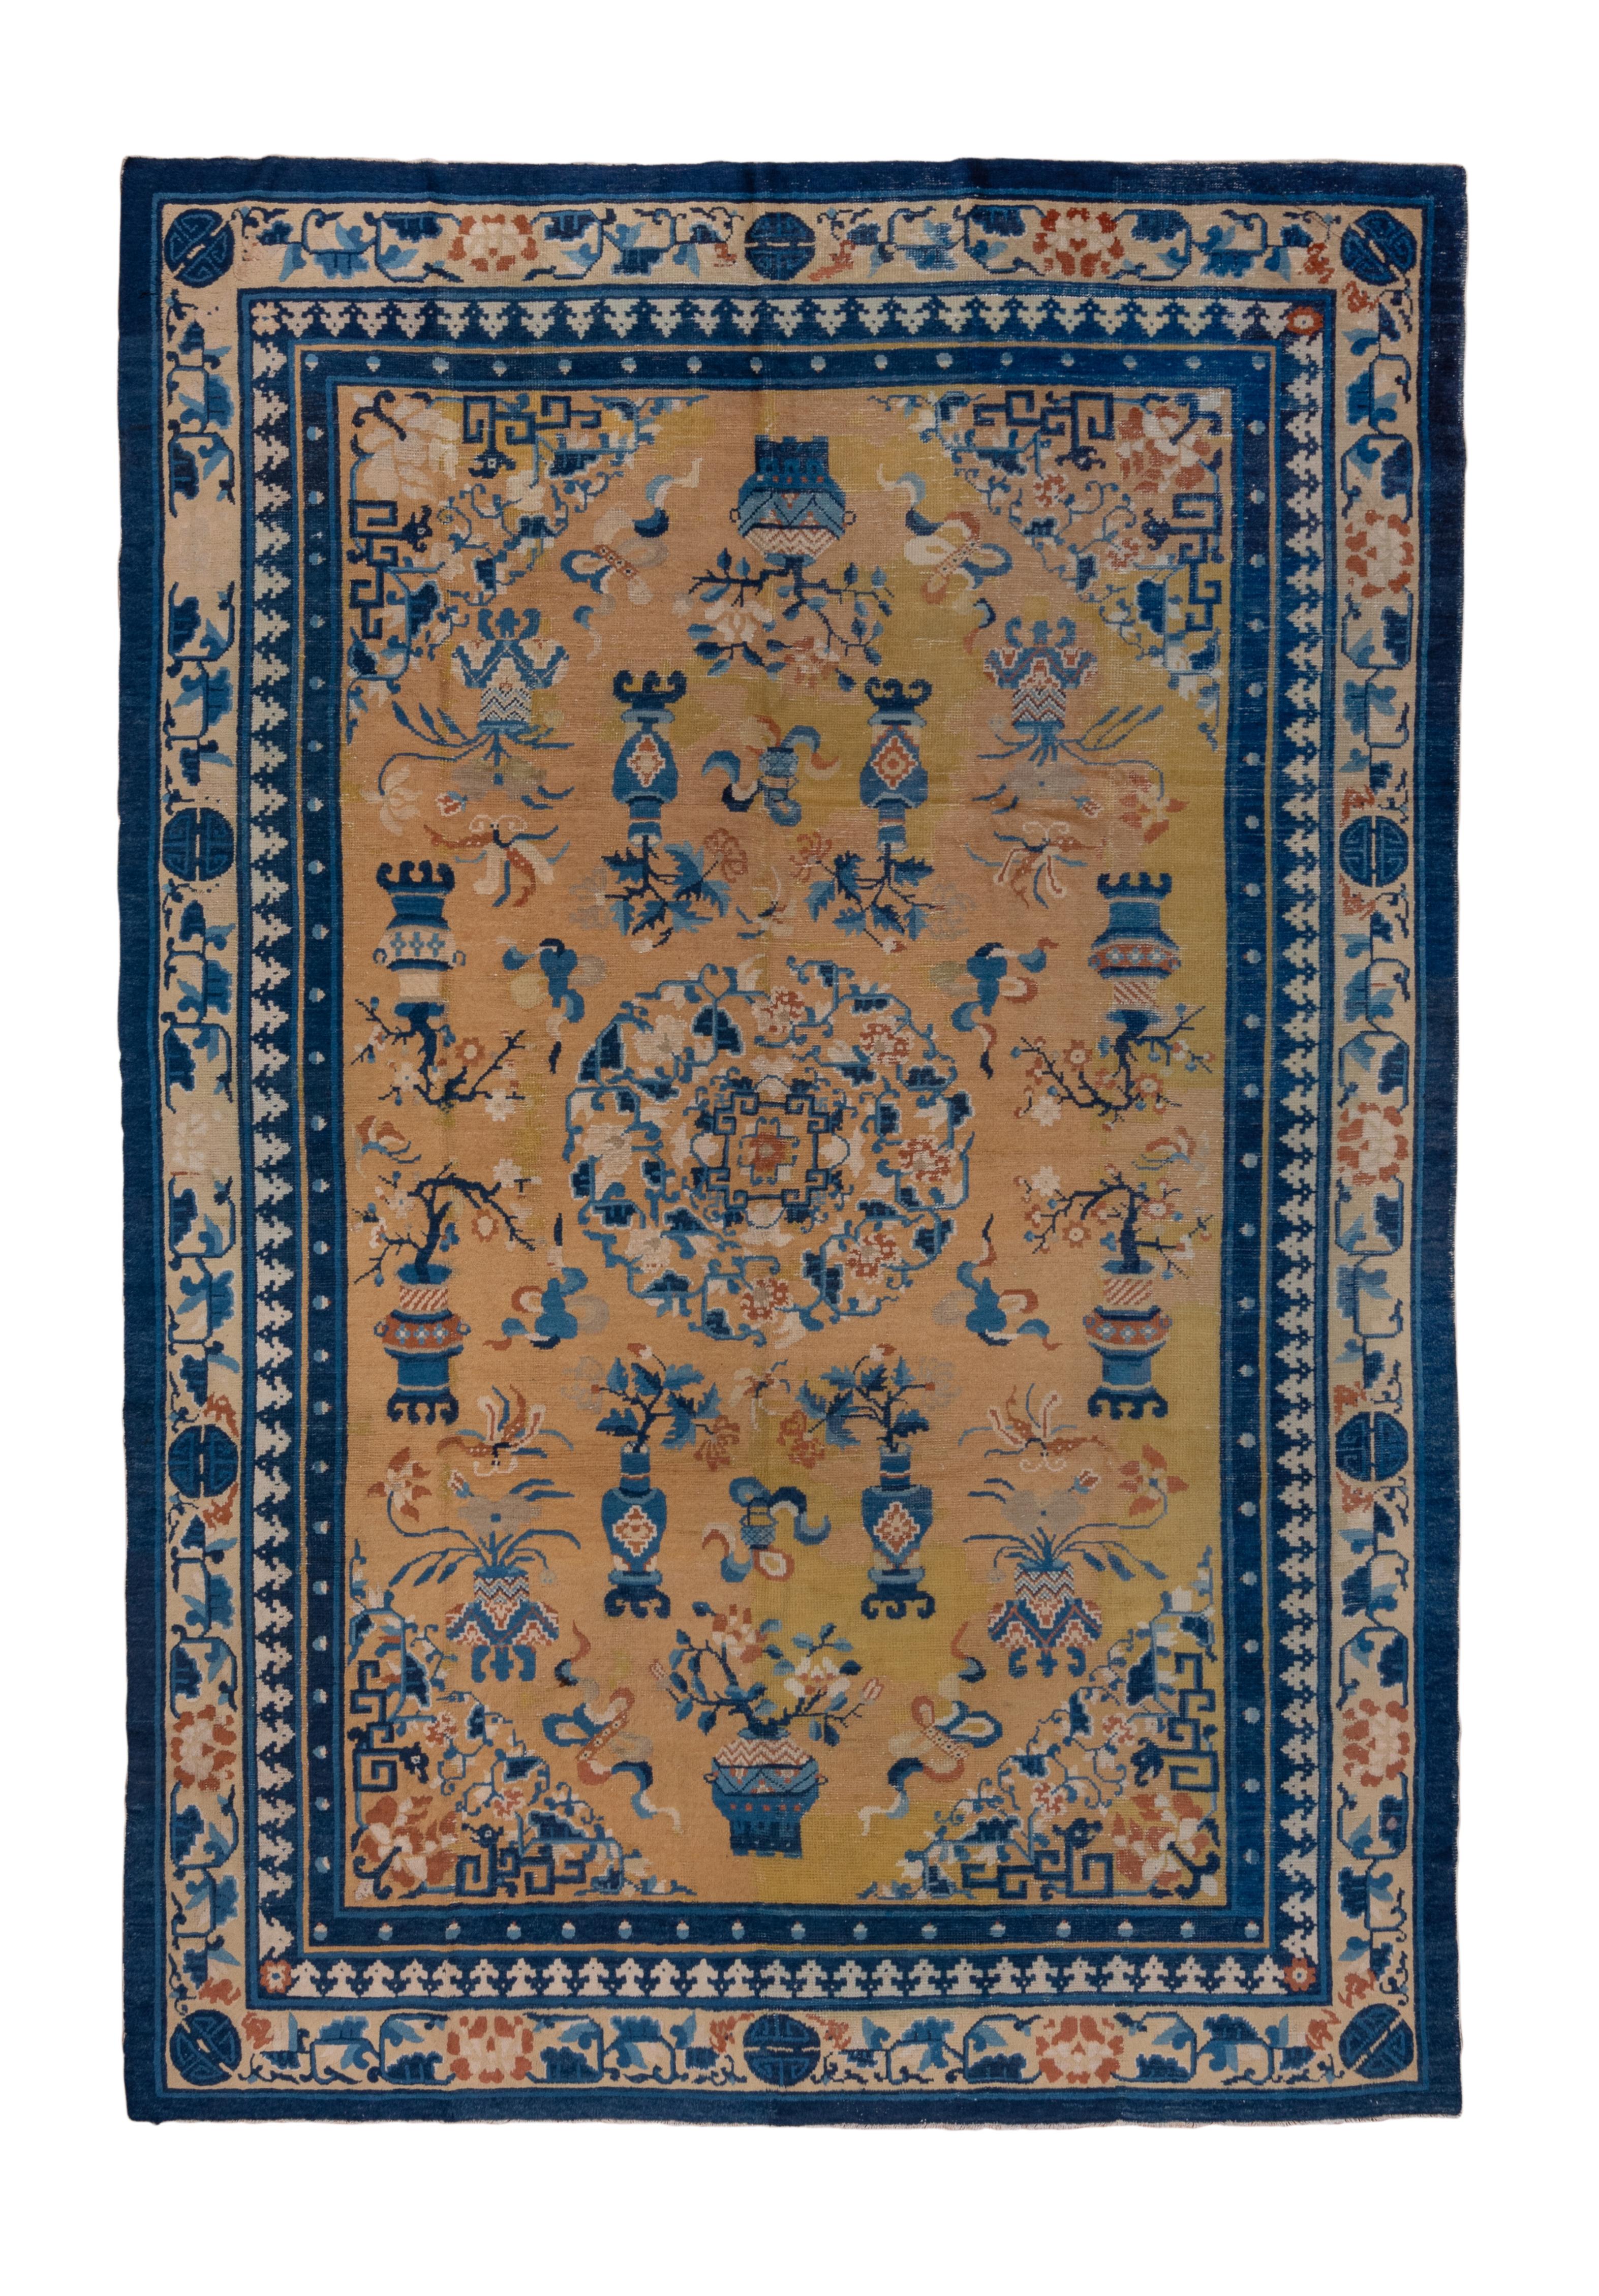 The old gold field shows a round, composite floral medallion, closely supported by vases, cloud bands, and bonsai trees, within triangular dragon fret and flower corners.  Straw main border and inner with a crenellation pattern. Outermost dark blue